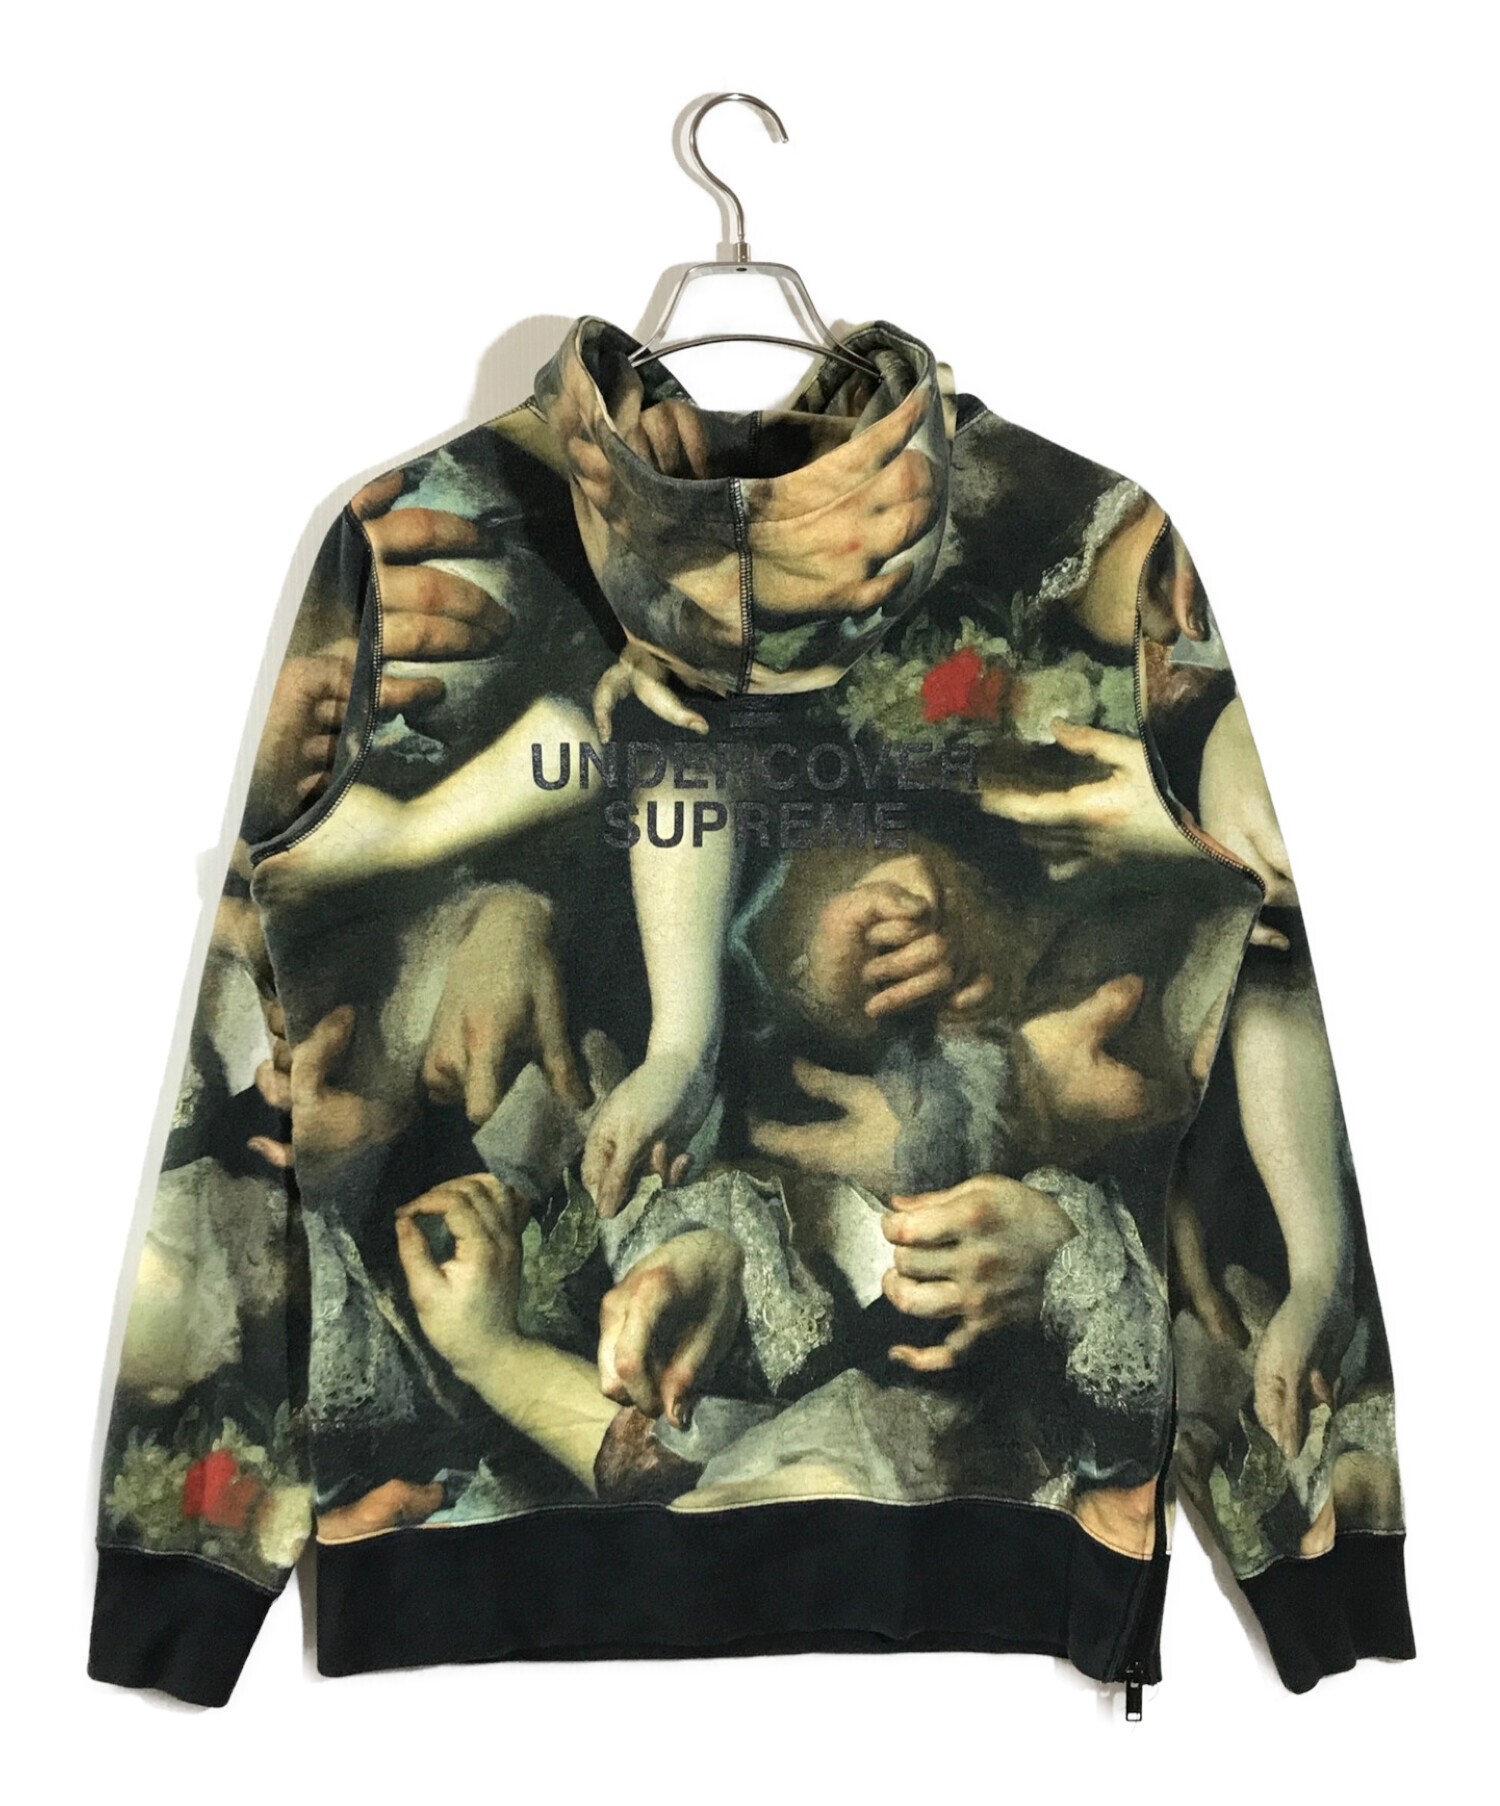 Supreme x Undercover hoodie